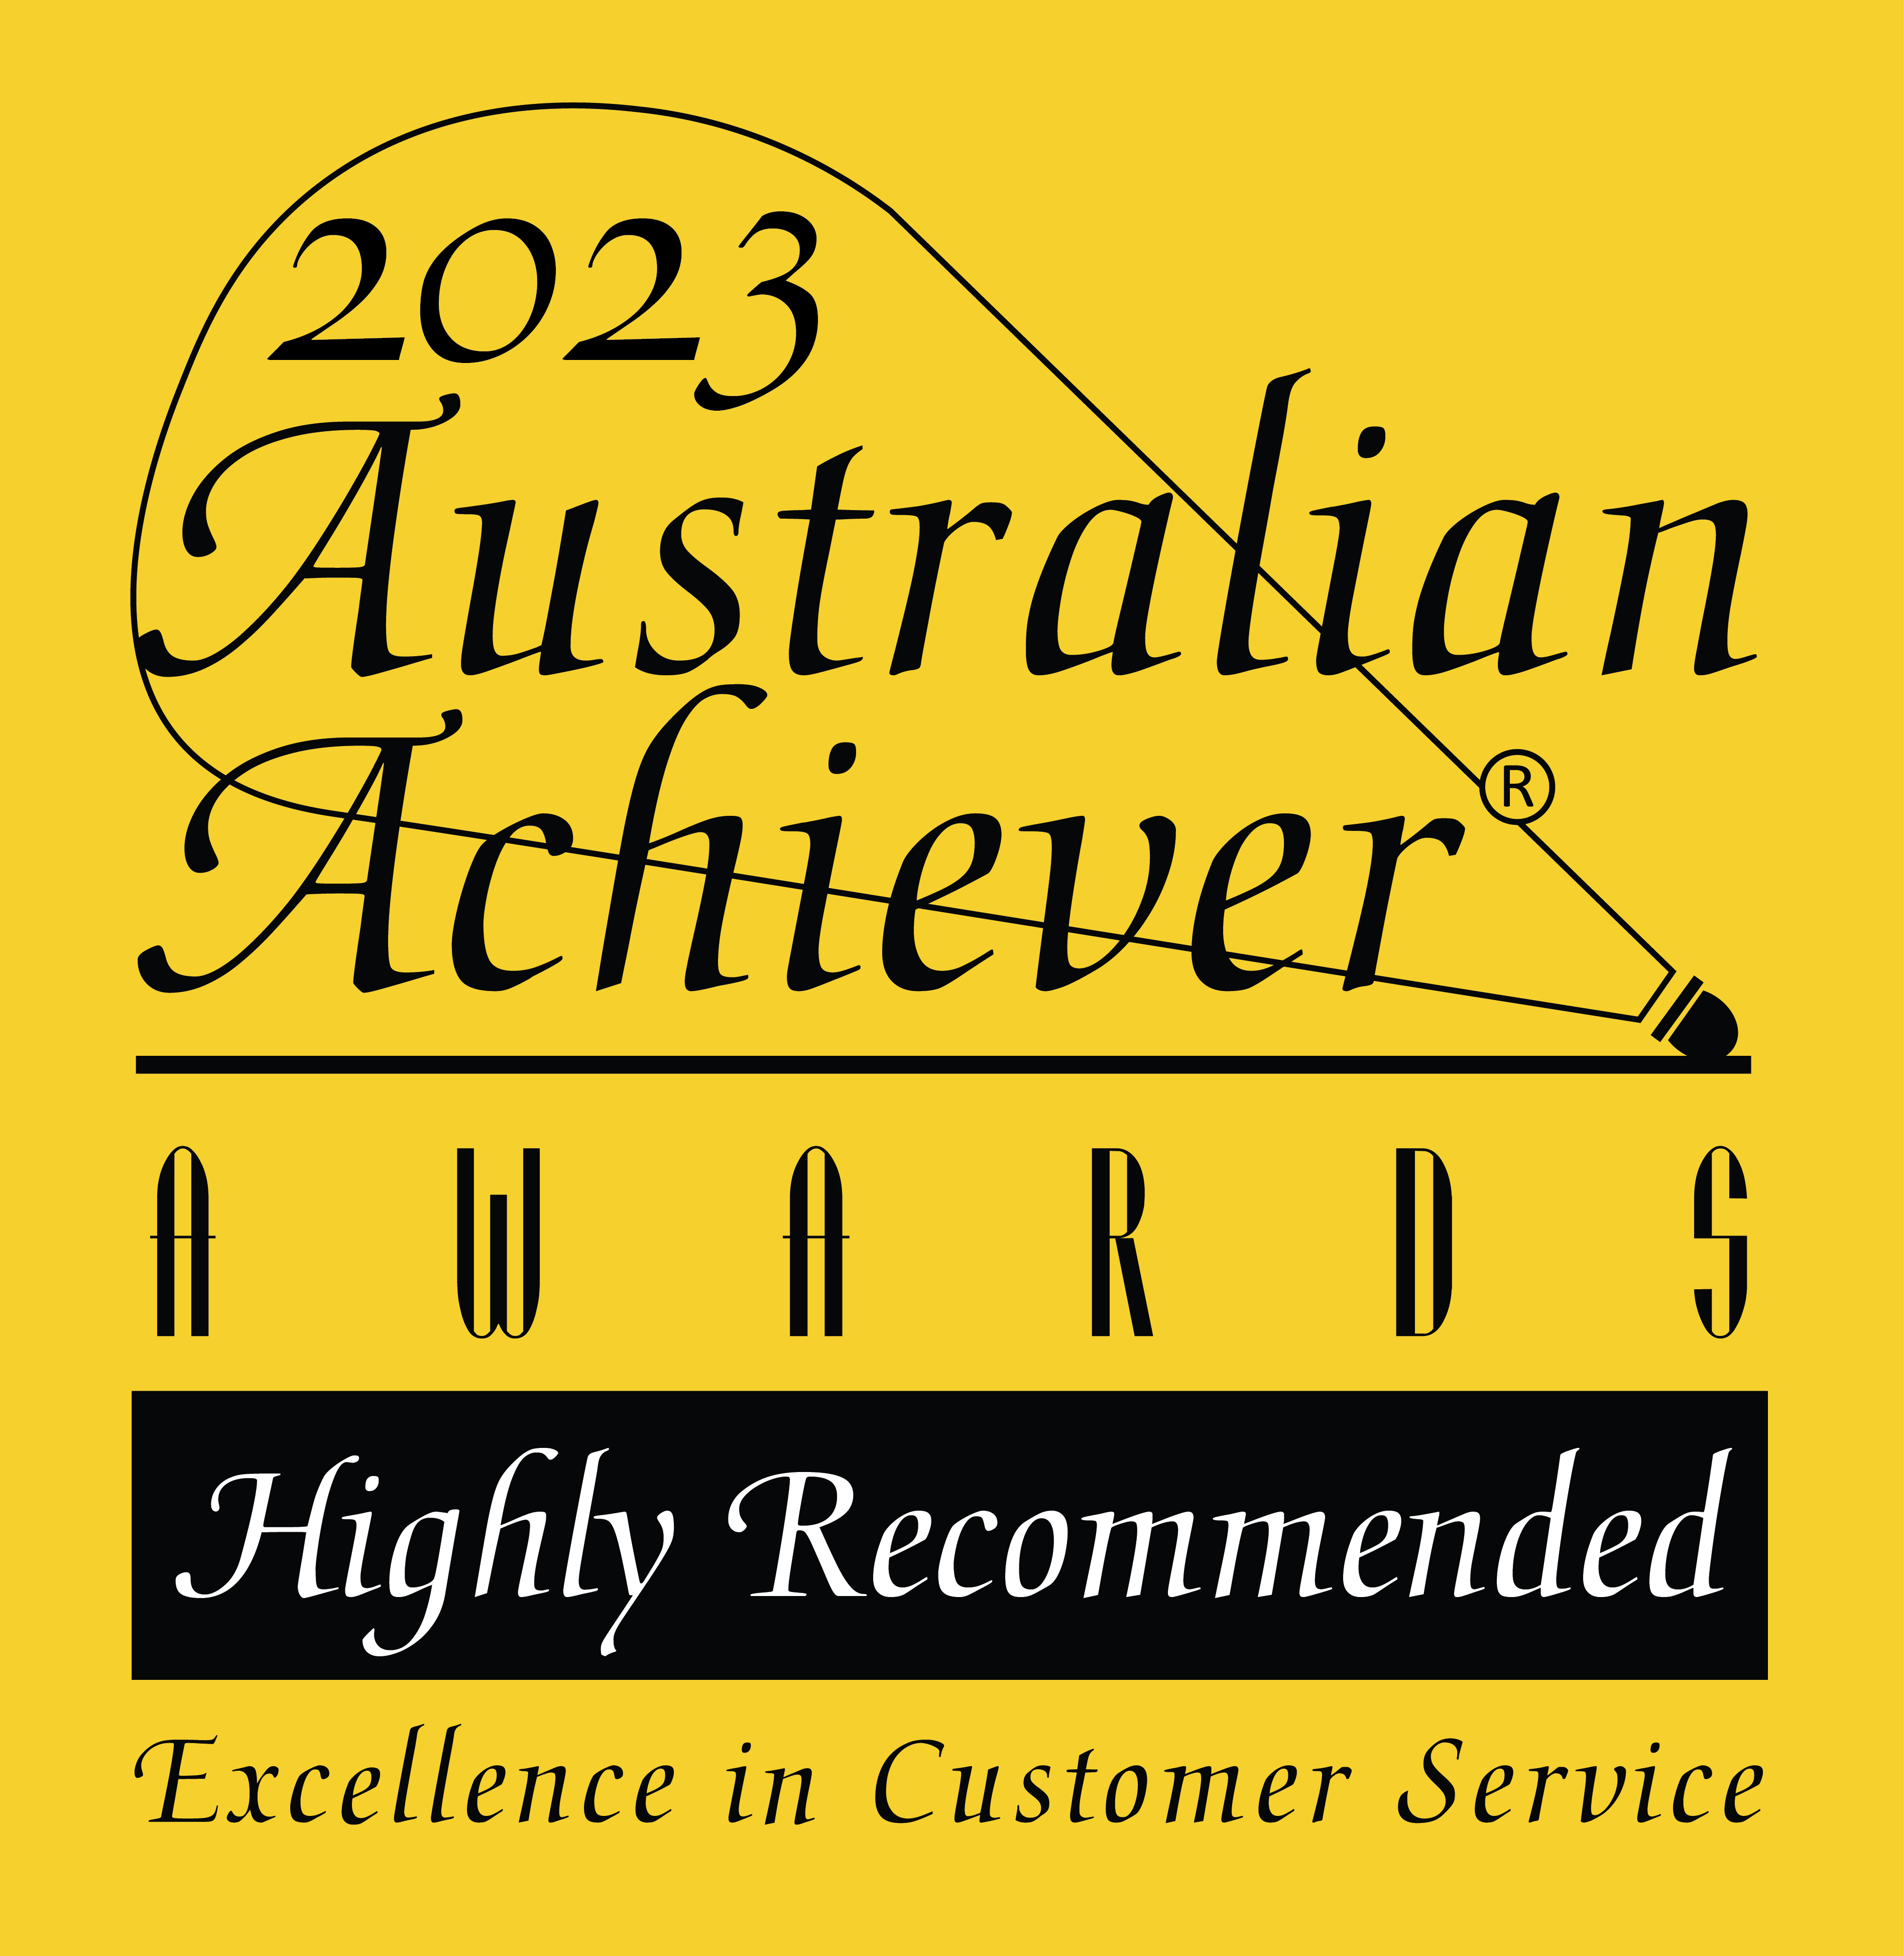 Complexica is Highly Recommended for Customer Satisfaction in the Australian Achiever Awards